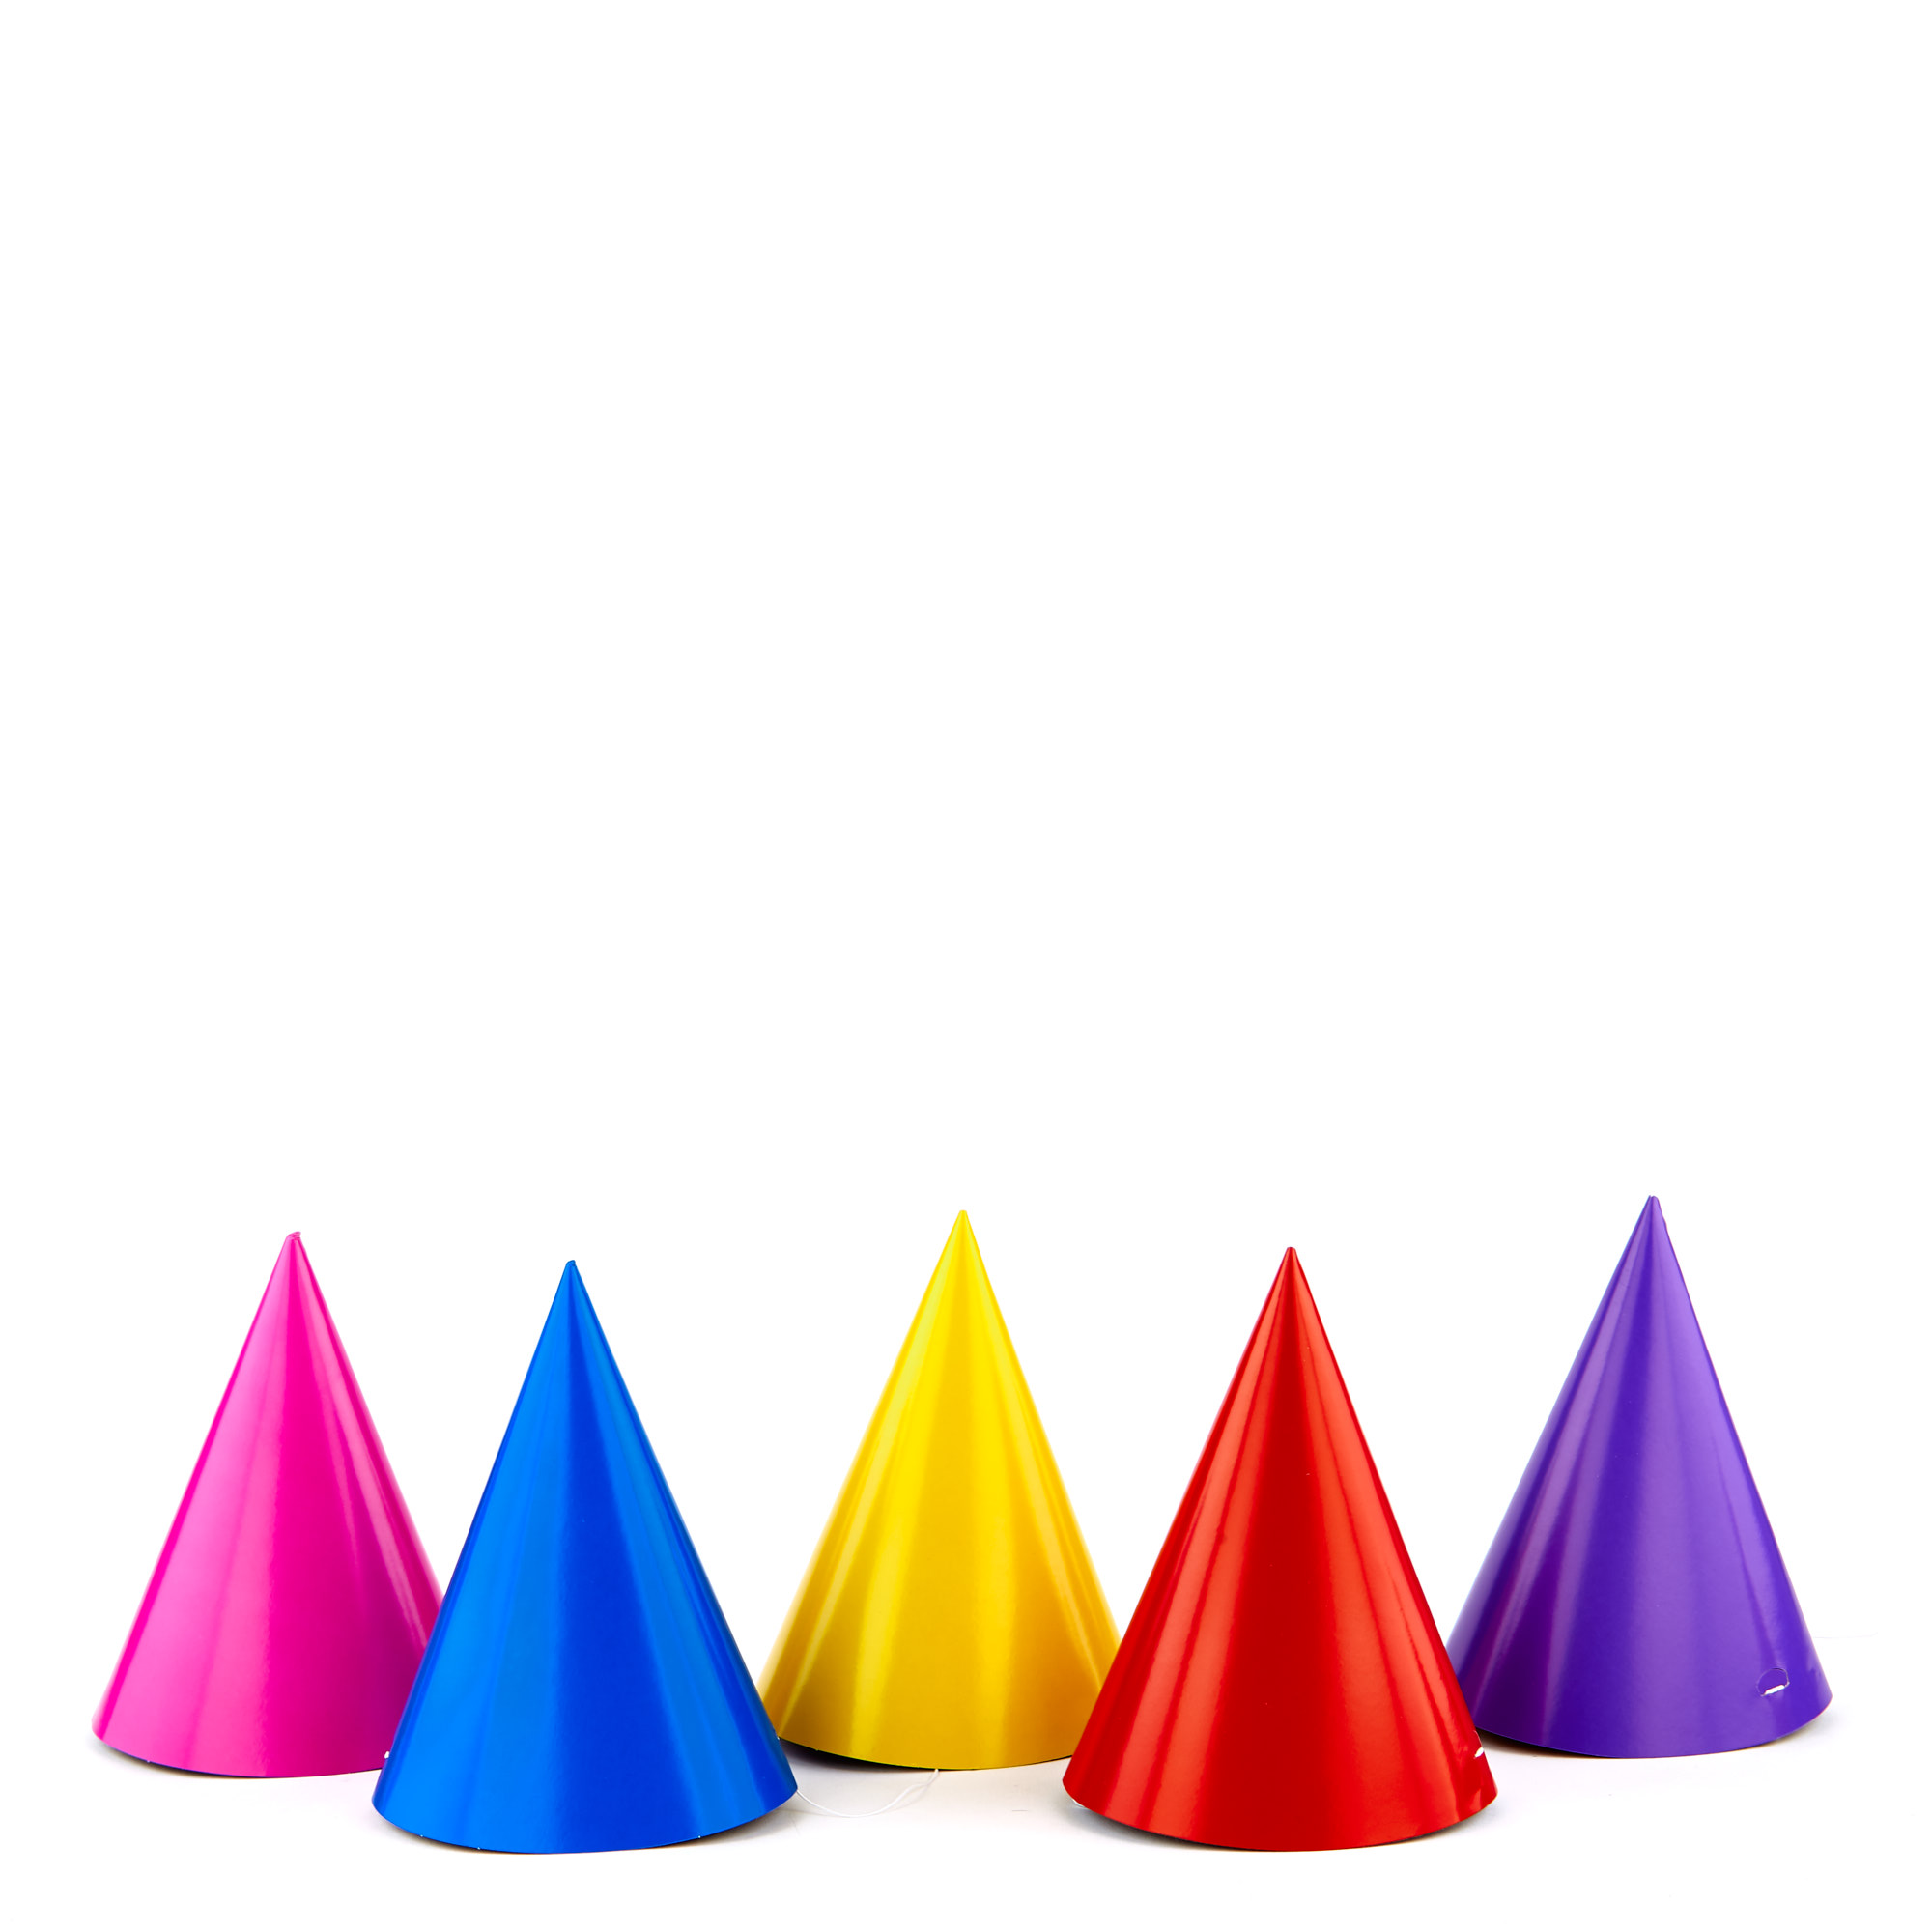 Child Size Creative Converting 8-Count Paper Party Hats 